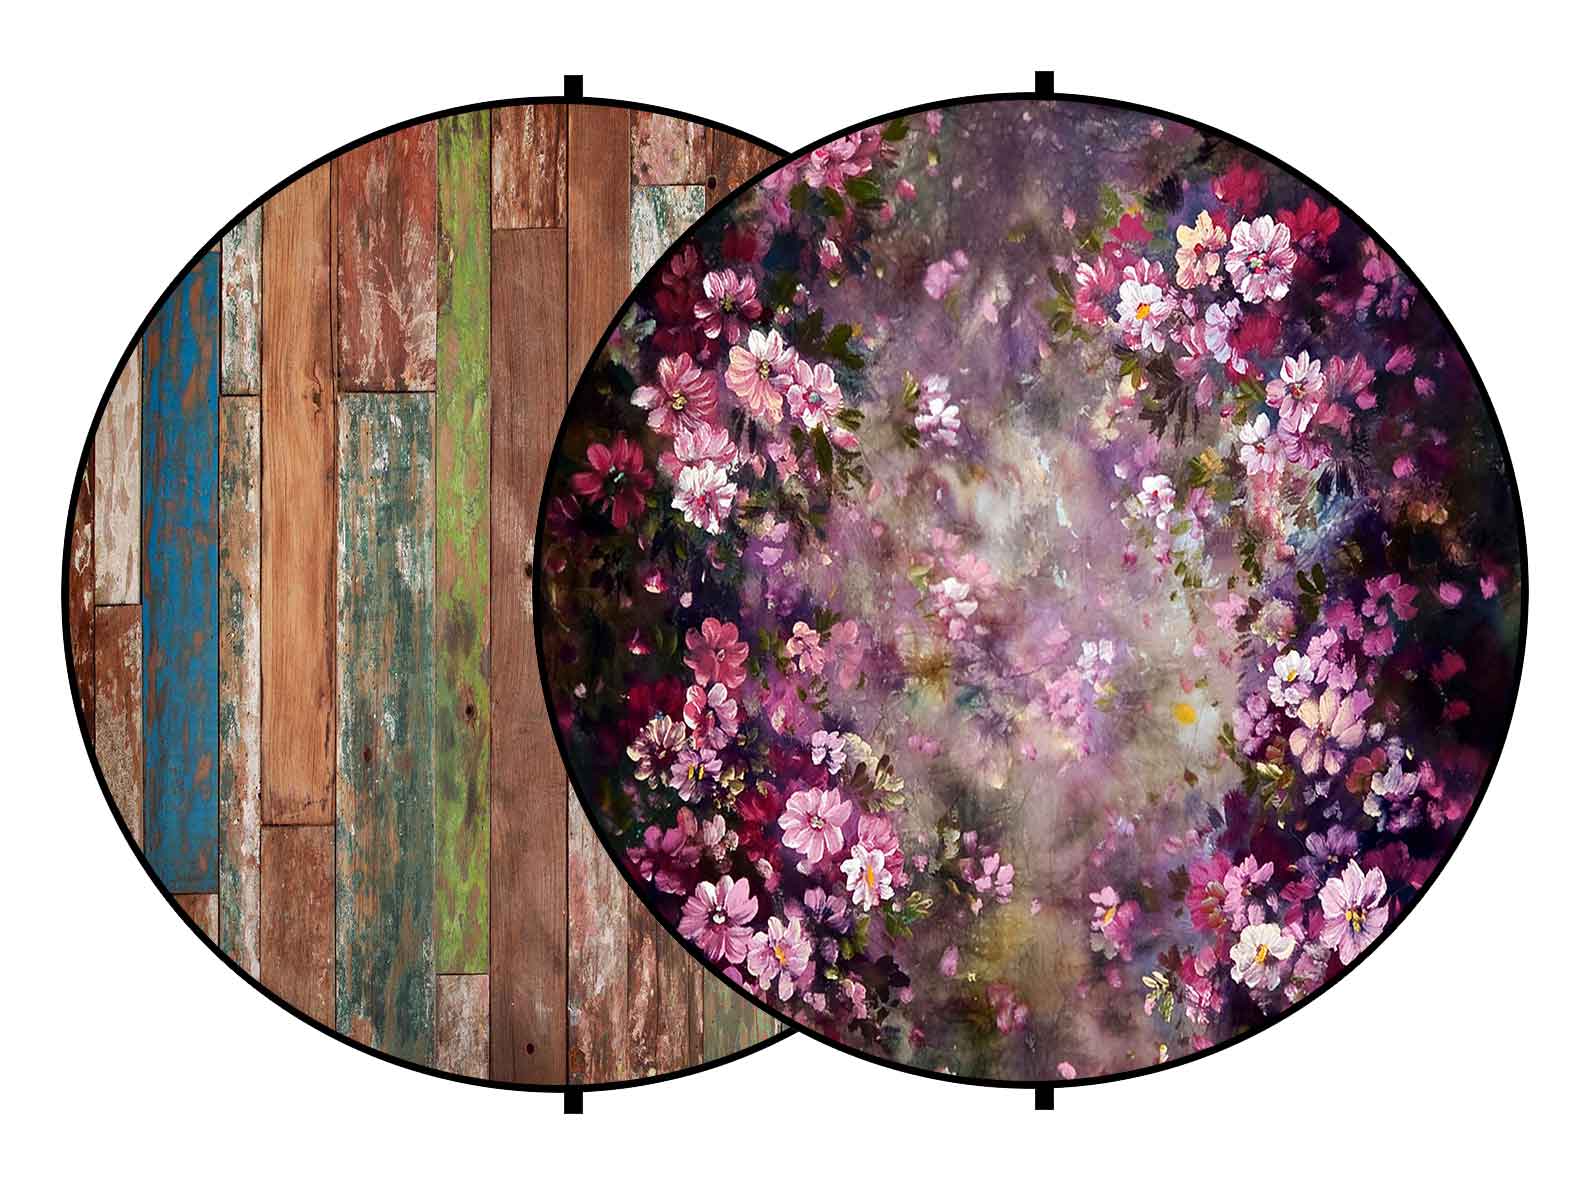 Fox Retro Wood/ Lilac Flowers Collapsible Backdrop 5x5ft(1.5x1.5m) - Foxbackdrop